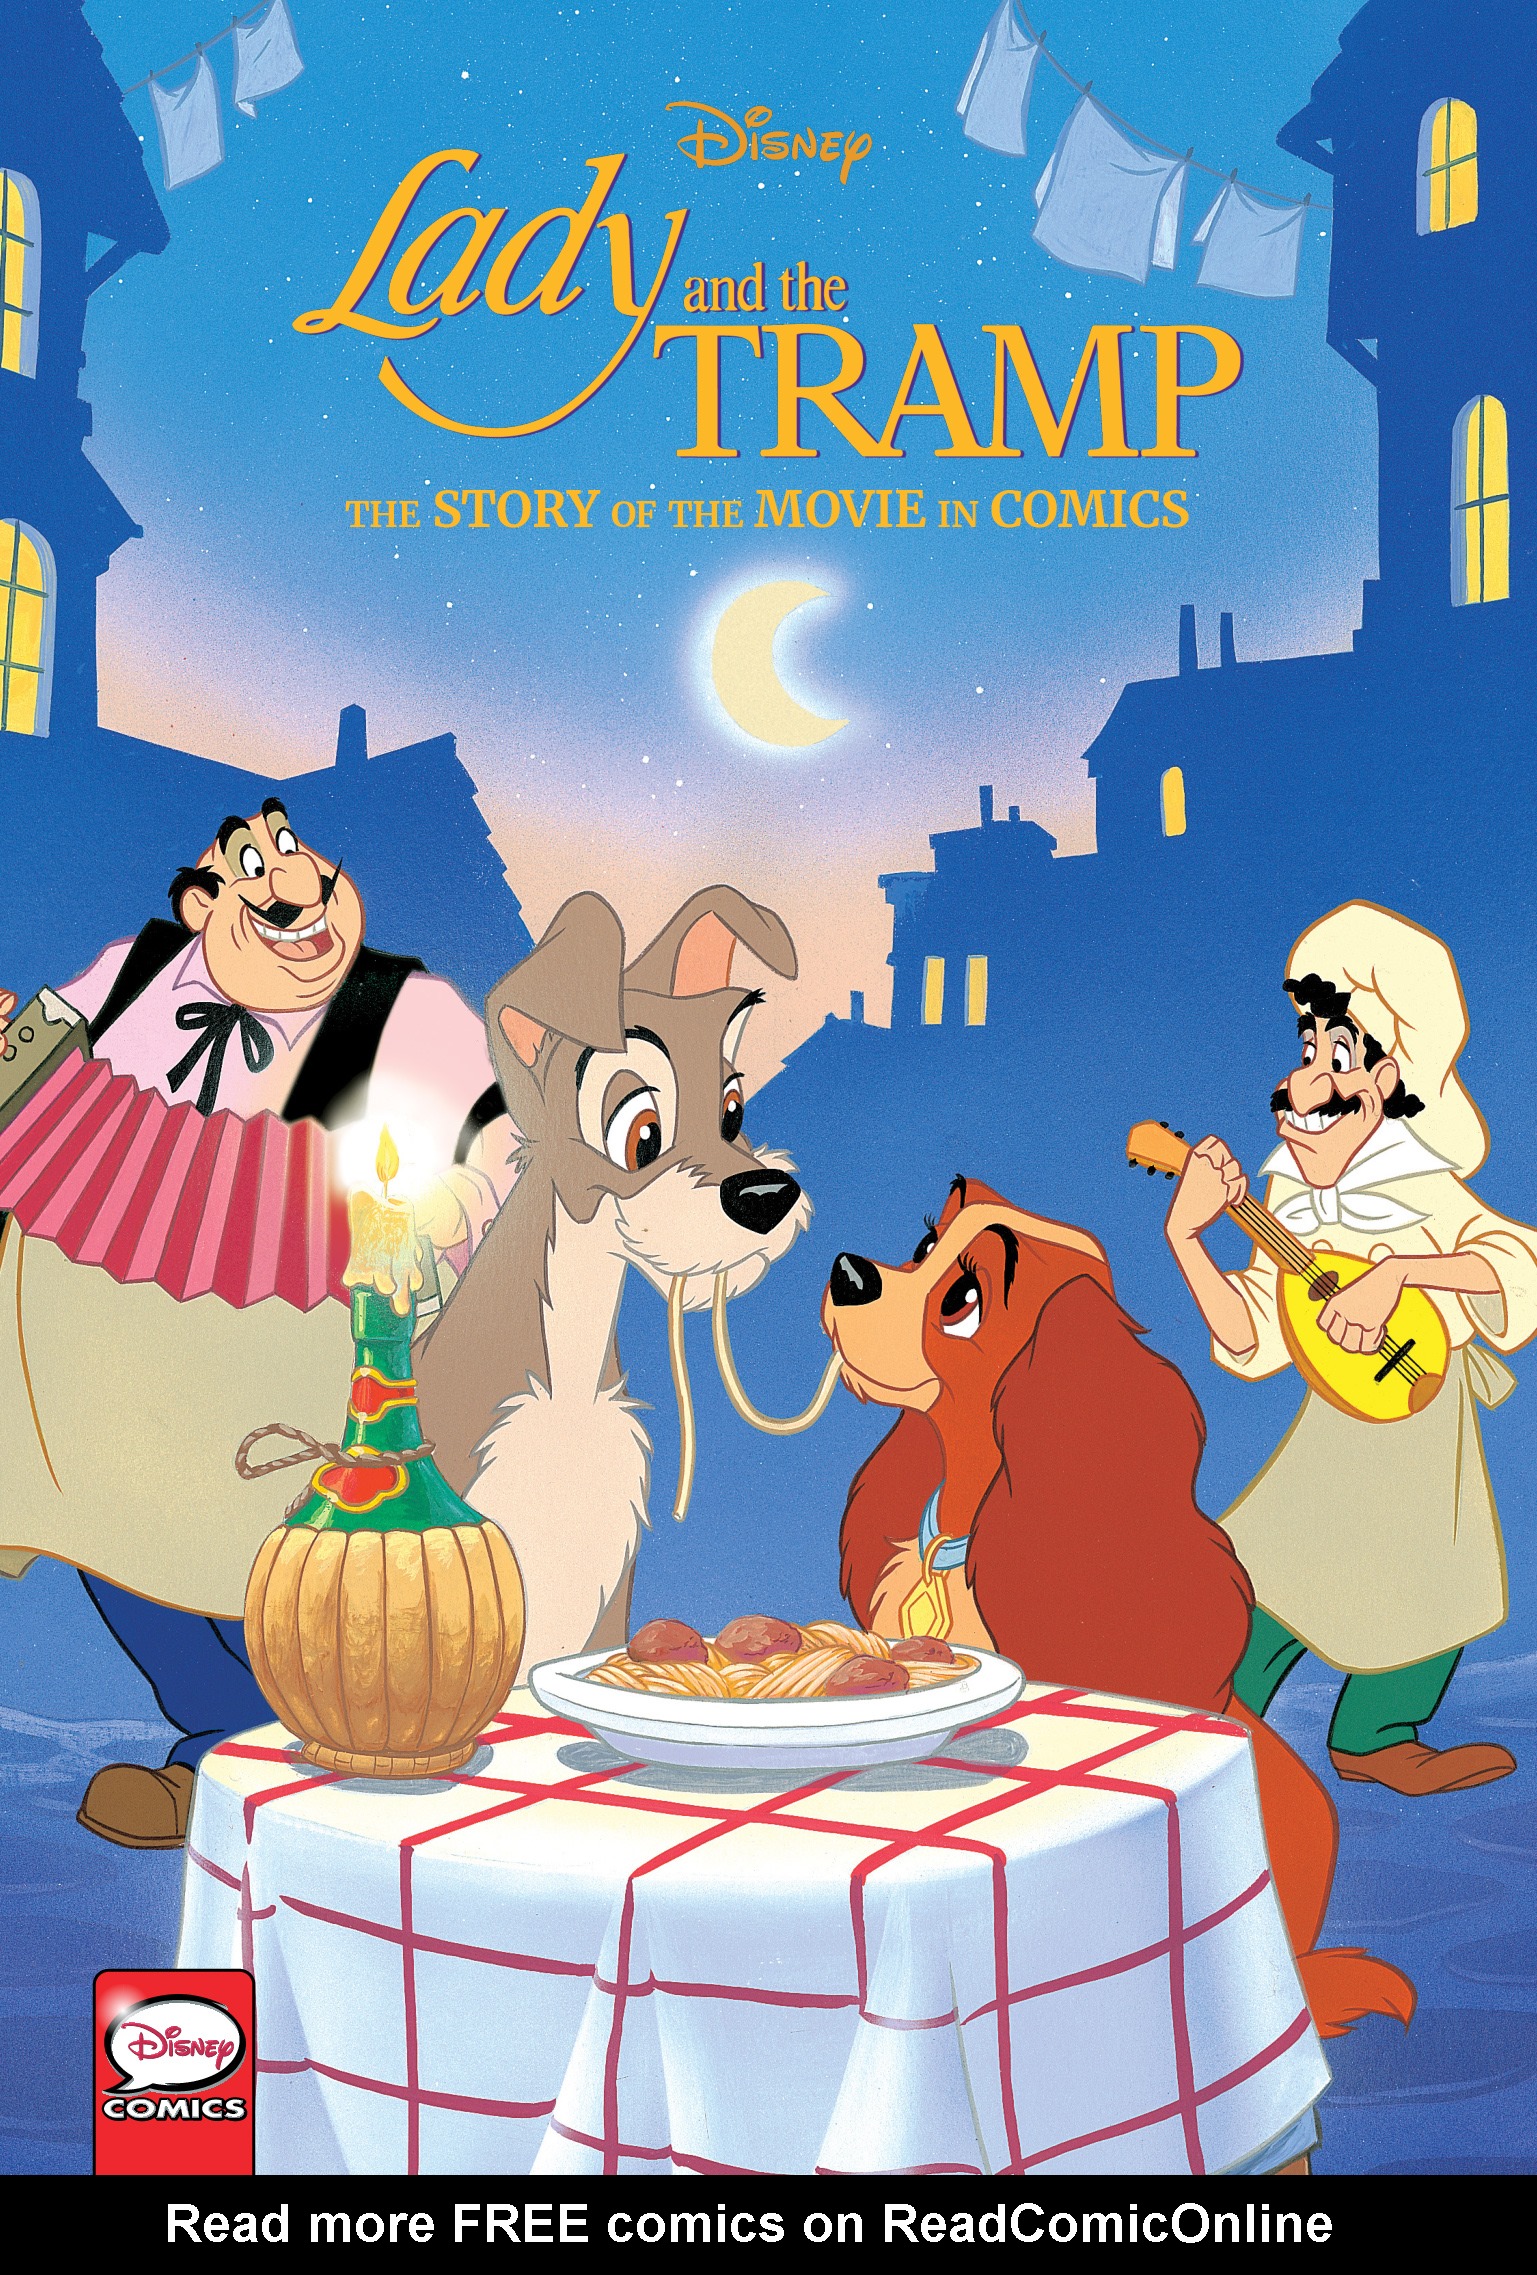 Read online Disney Lady and the Tramp: The Story of the Movie in Comics comic -  Issue # Full - 1